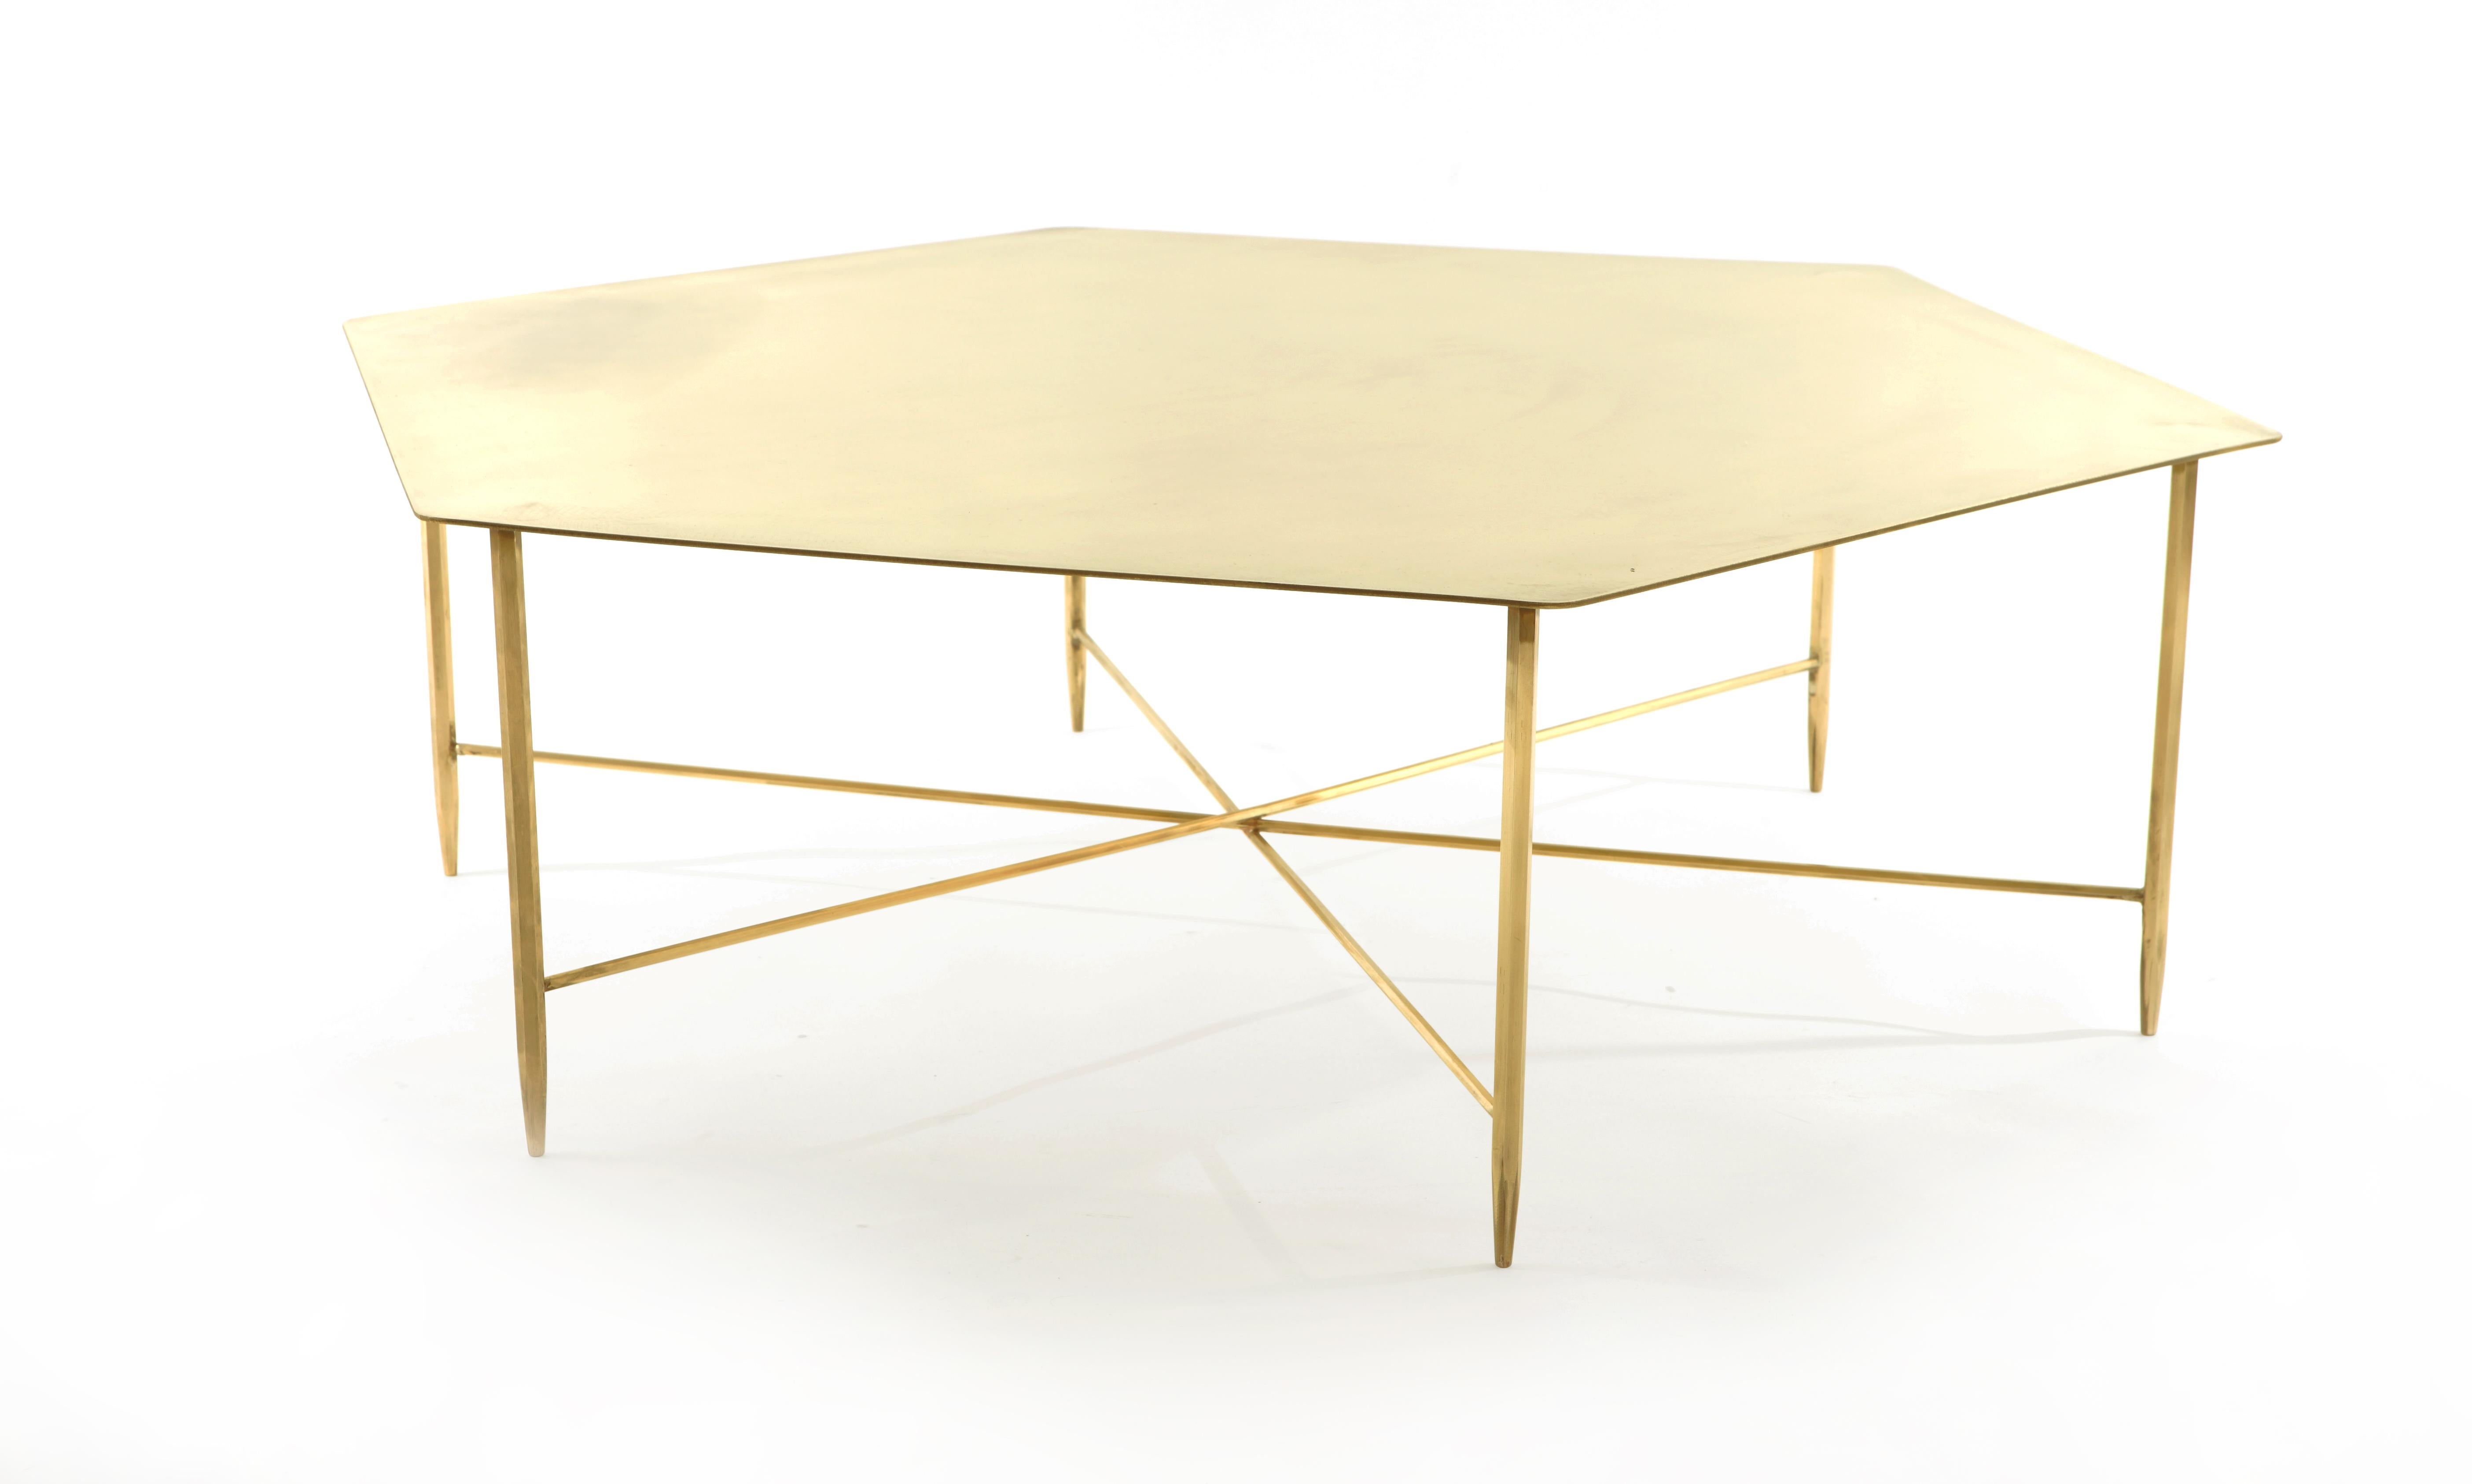 The discovery of hexagonal extruded profiles, commonly used in the boating industry, inspired the design of the luxurious brass tables of the Marina Collection. In true celebration of the hexagonal form, the elements of the table consist of the